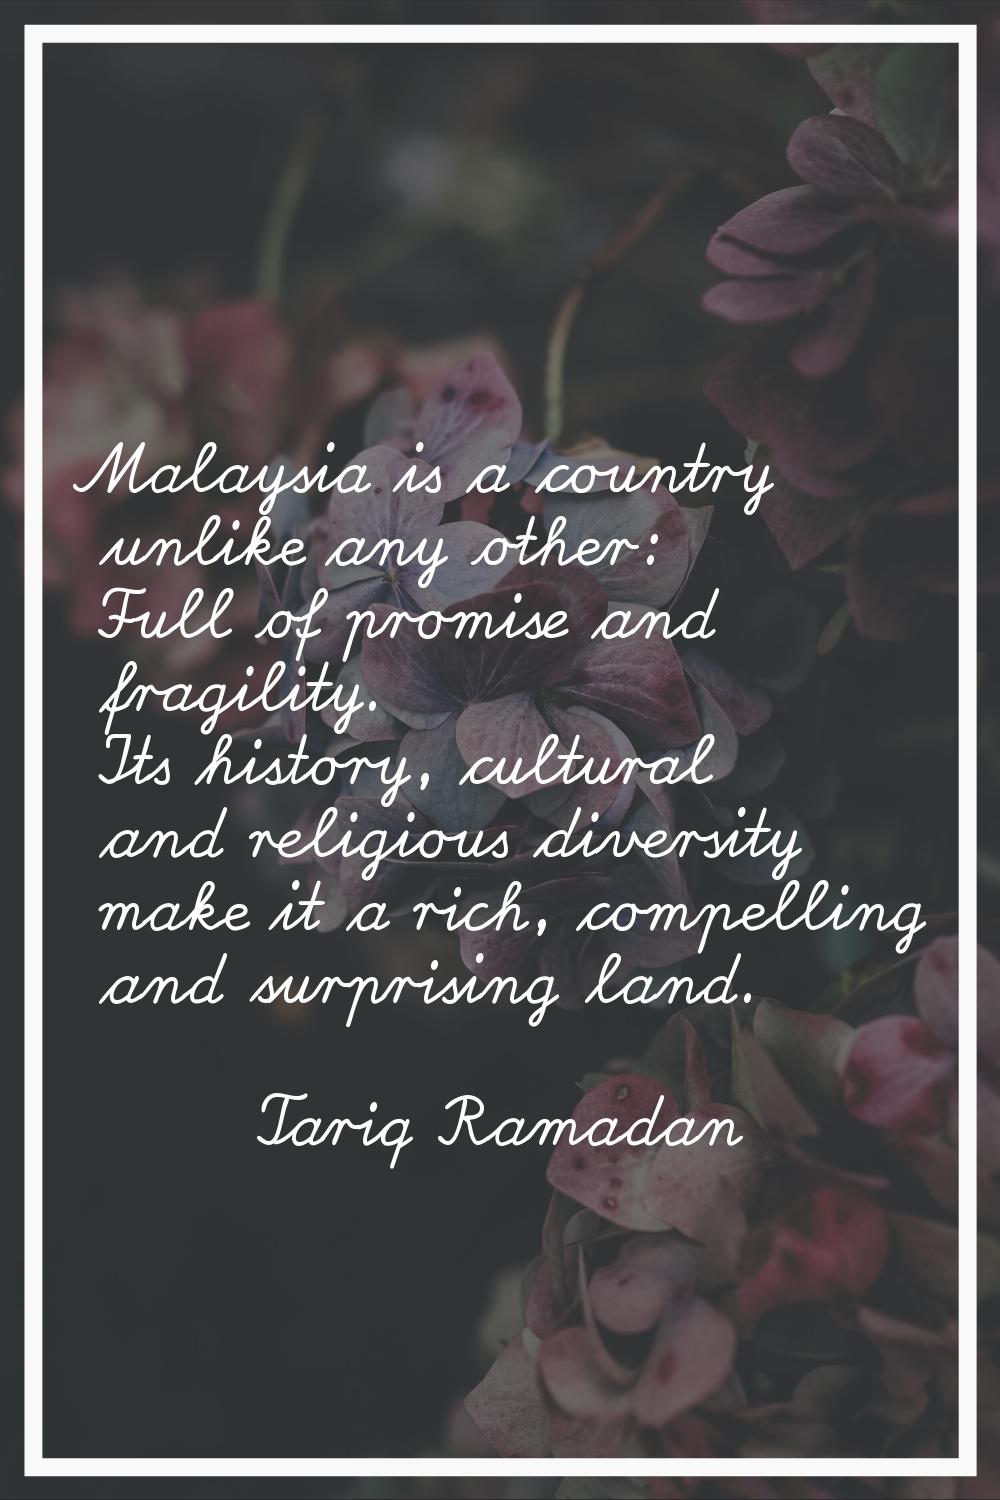 Malaysia is a country unlike any other: Full of promise and fragility. Its history, cultural and re